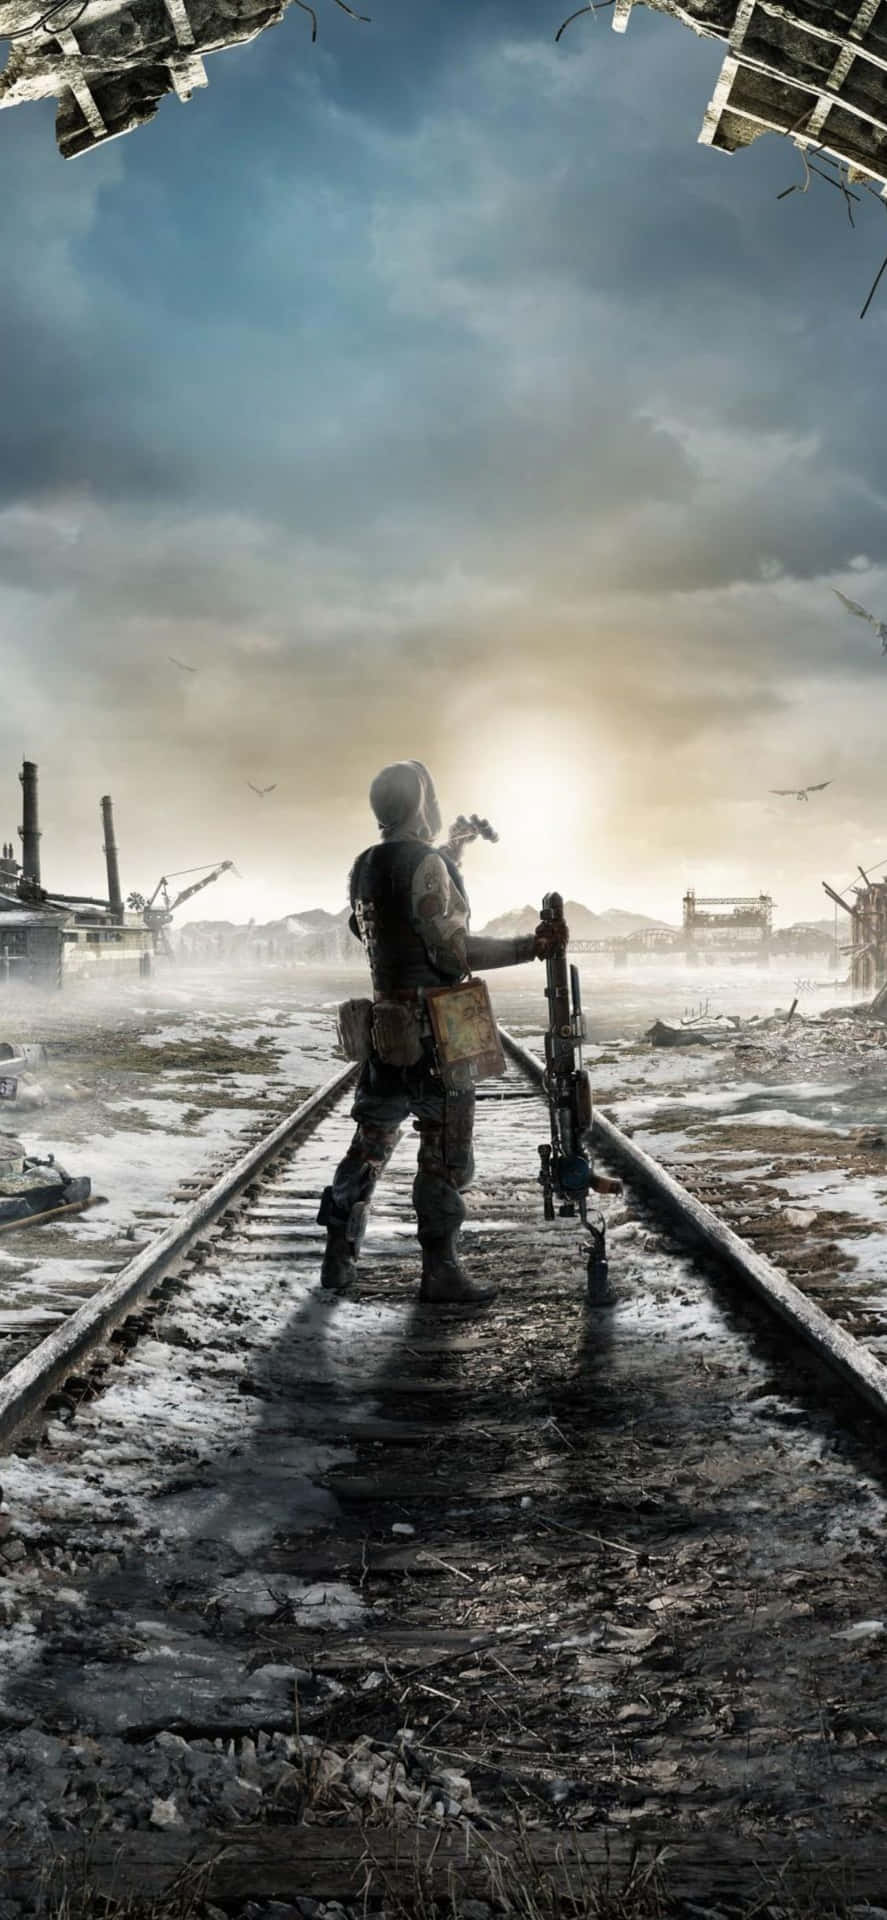 Get ready for the start of an apocalyptic journey in Metro Exodus.